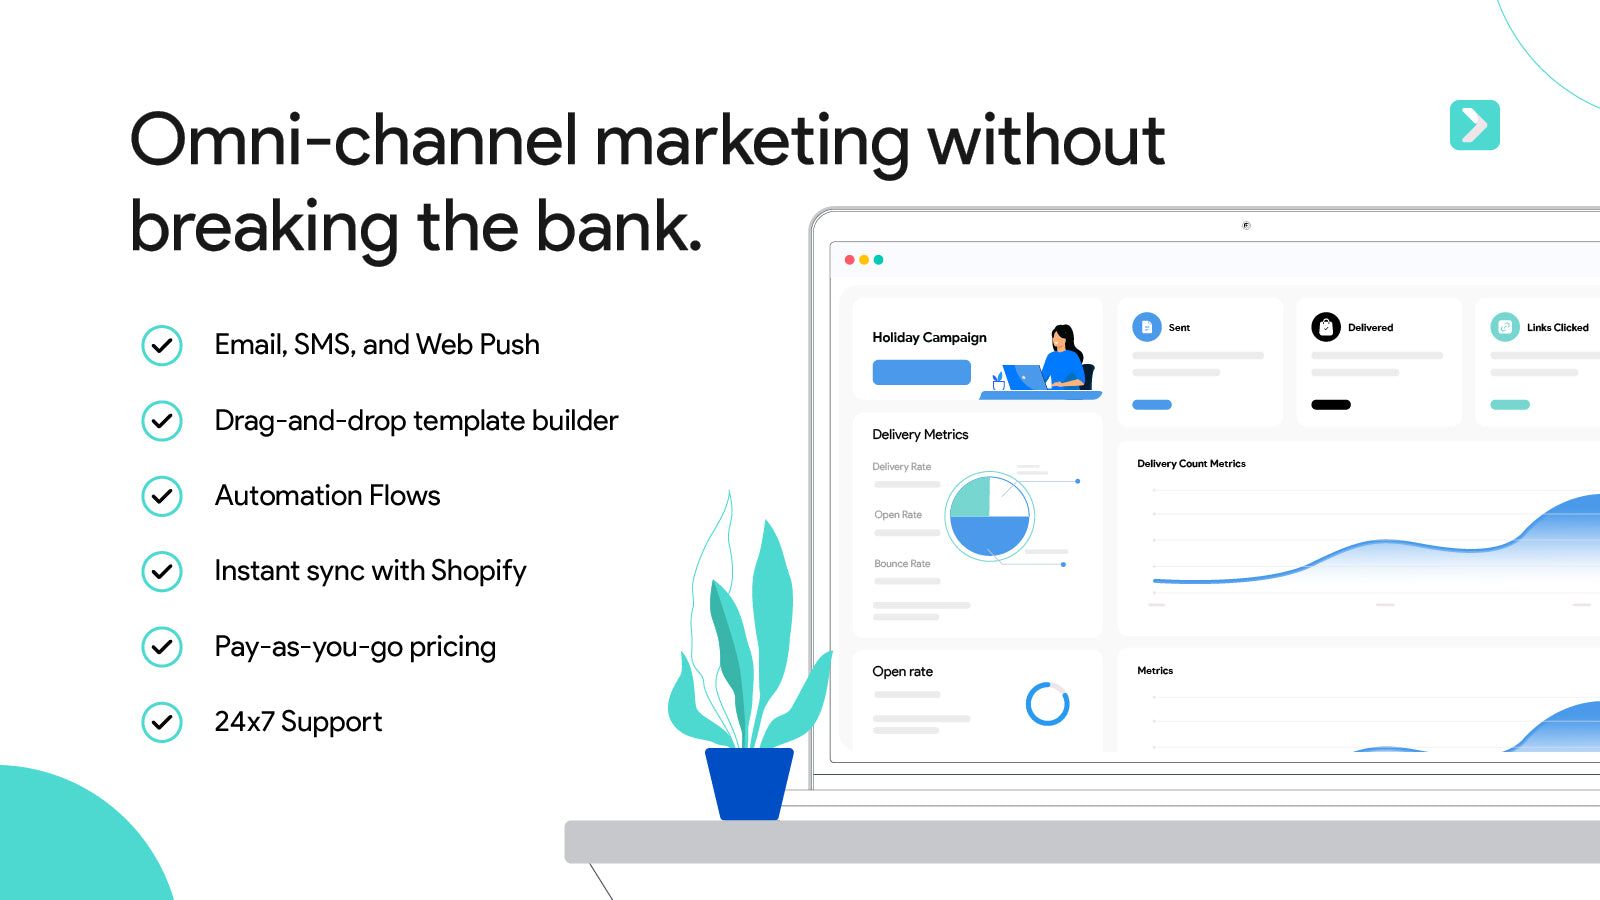 Omni-channel marketing without breaking the bank.